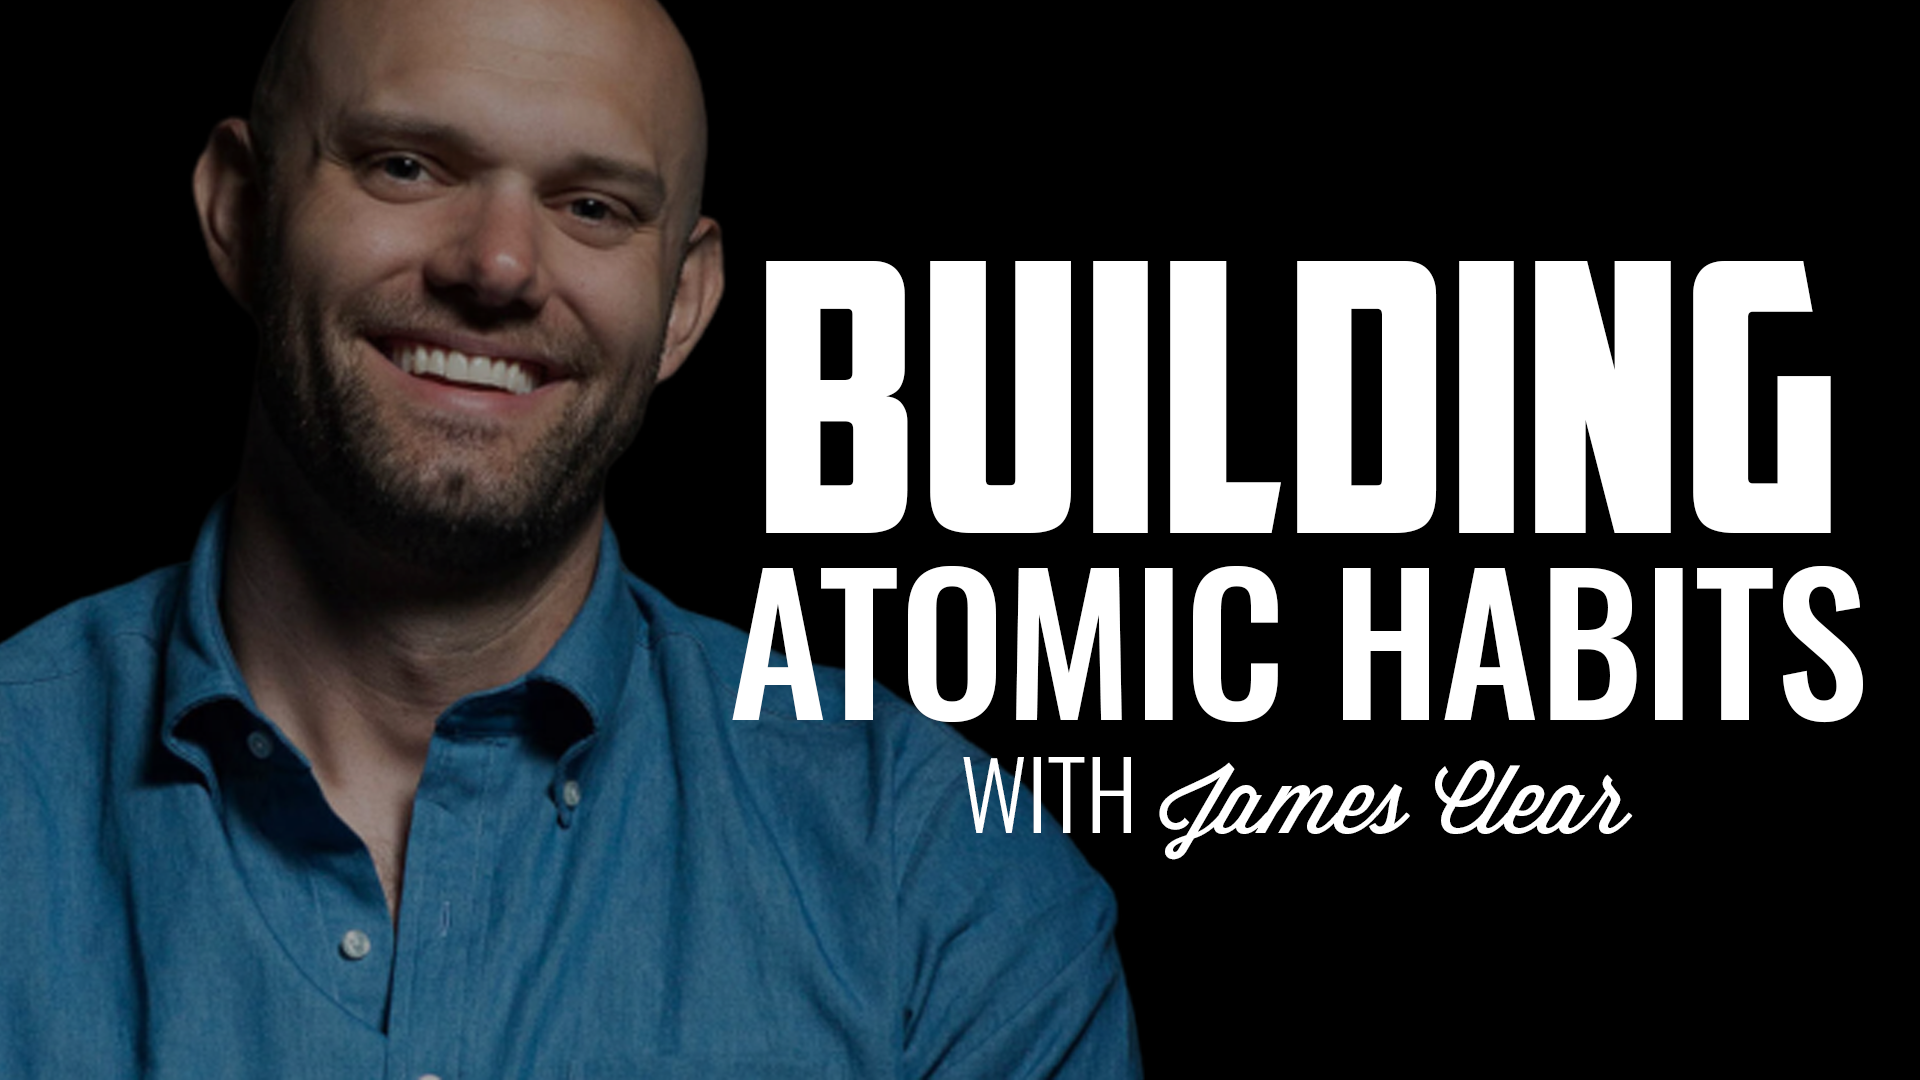 atomic habits by james clear